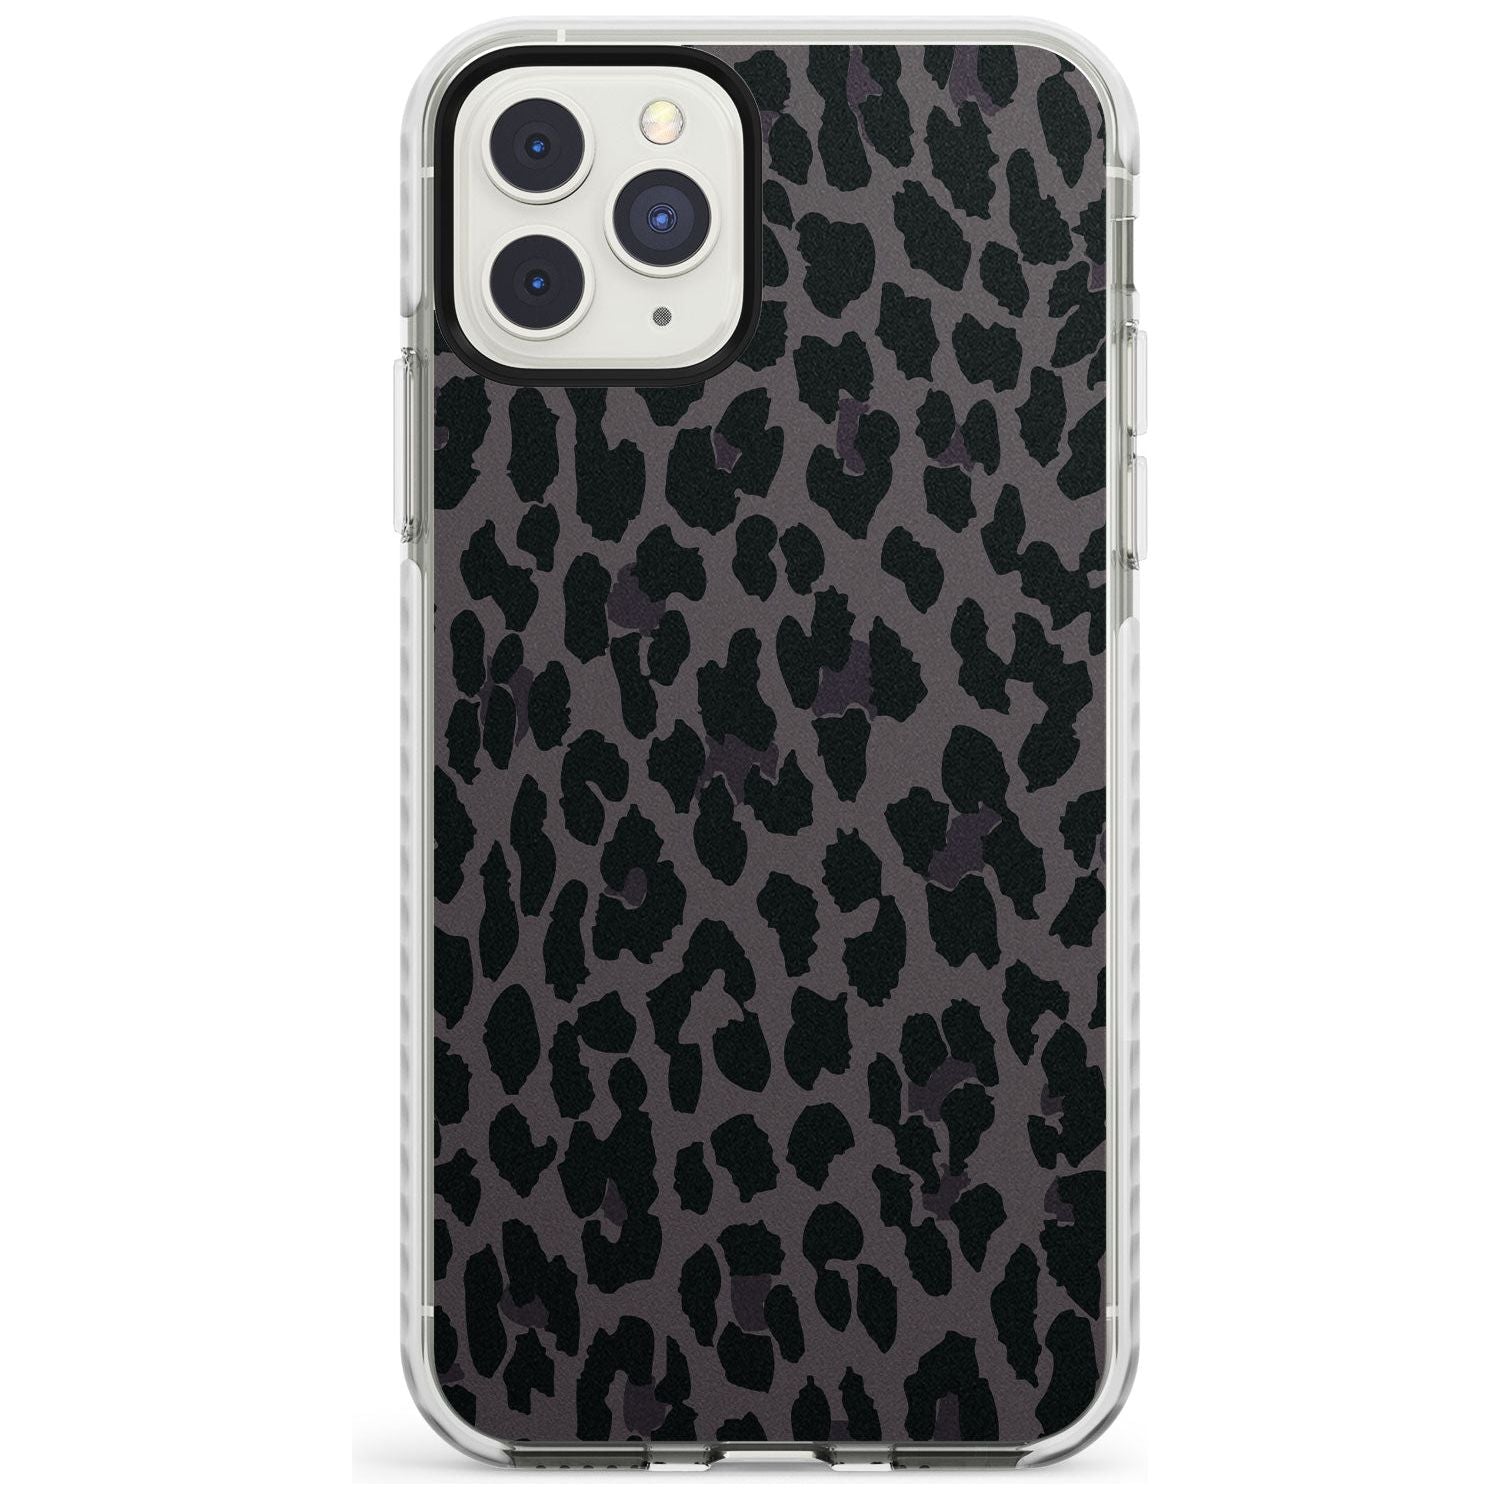 Dark Animal Print Pattern Large Leopard Impact Phone Case for iPhone 11 Pro Max